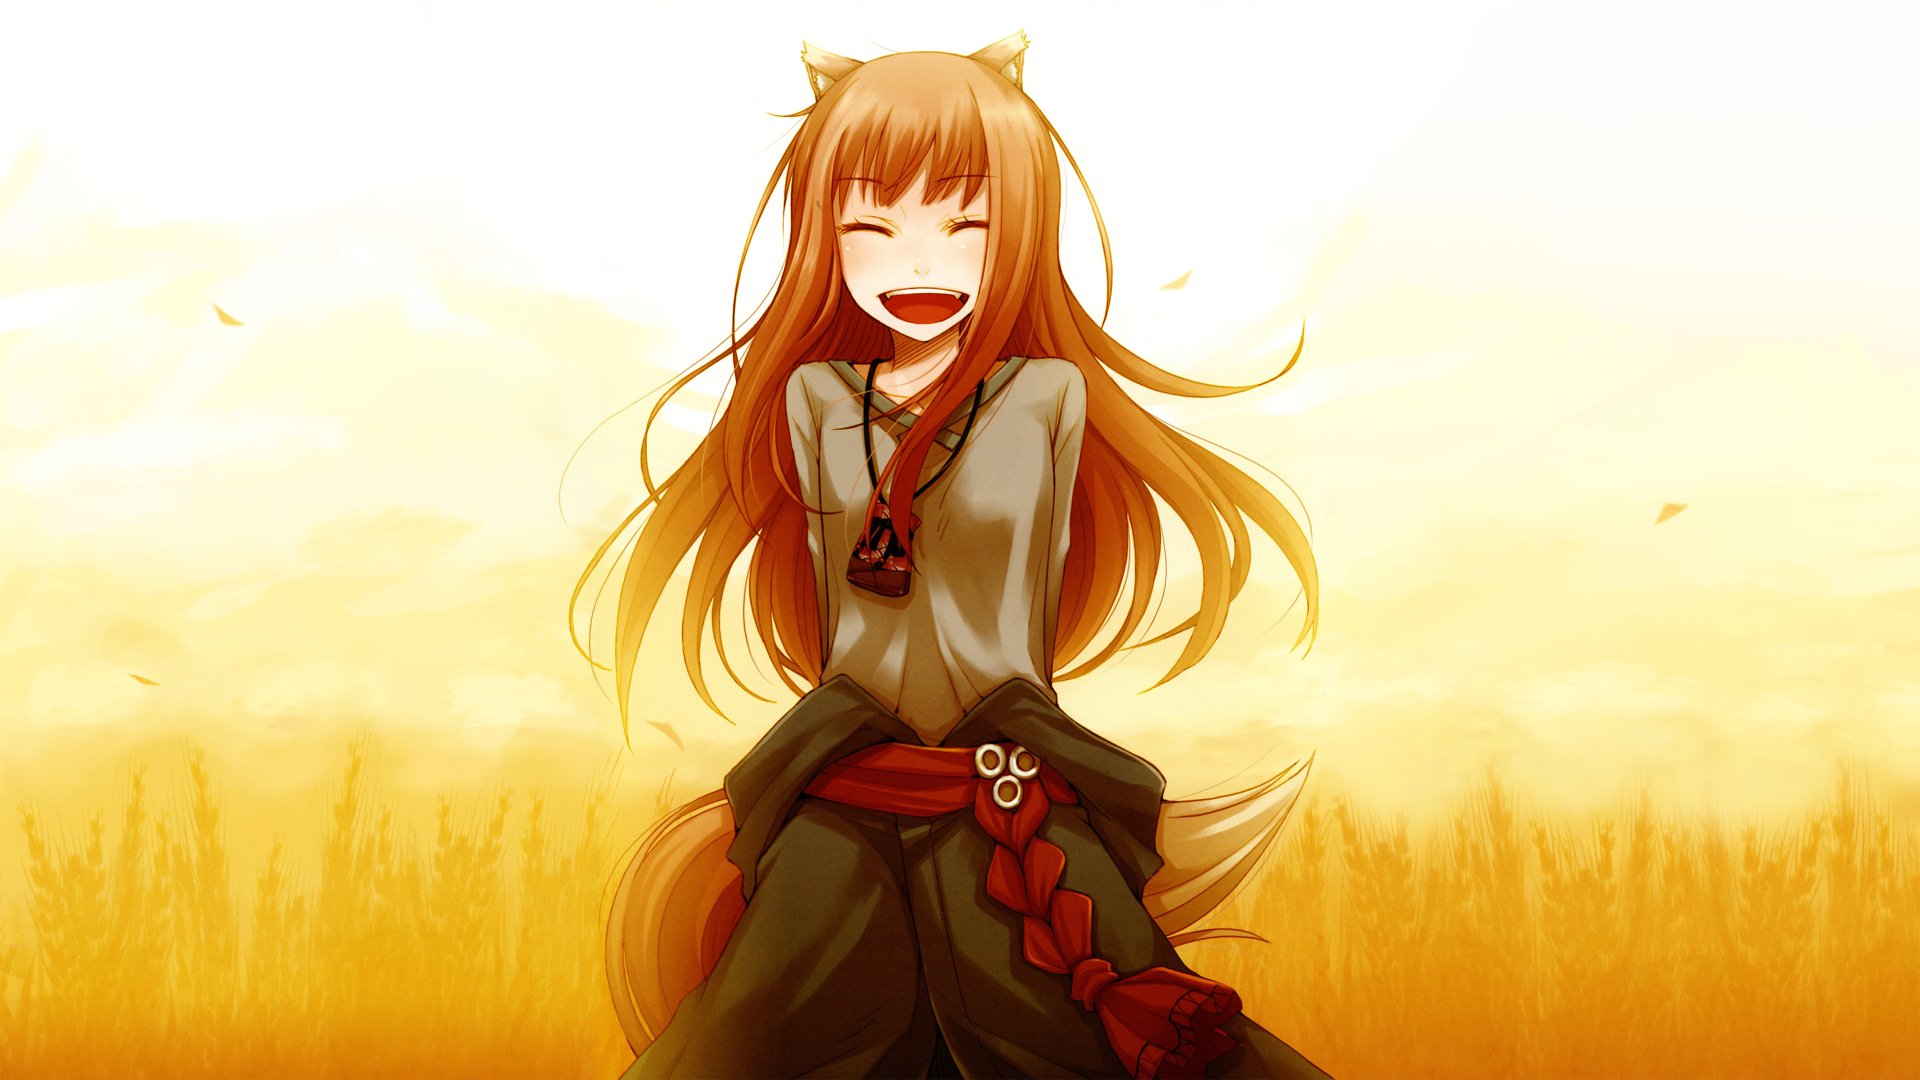 Spice and Wolf 4k Ultra HD Wallpaper